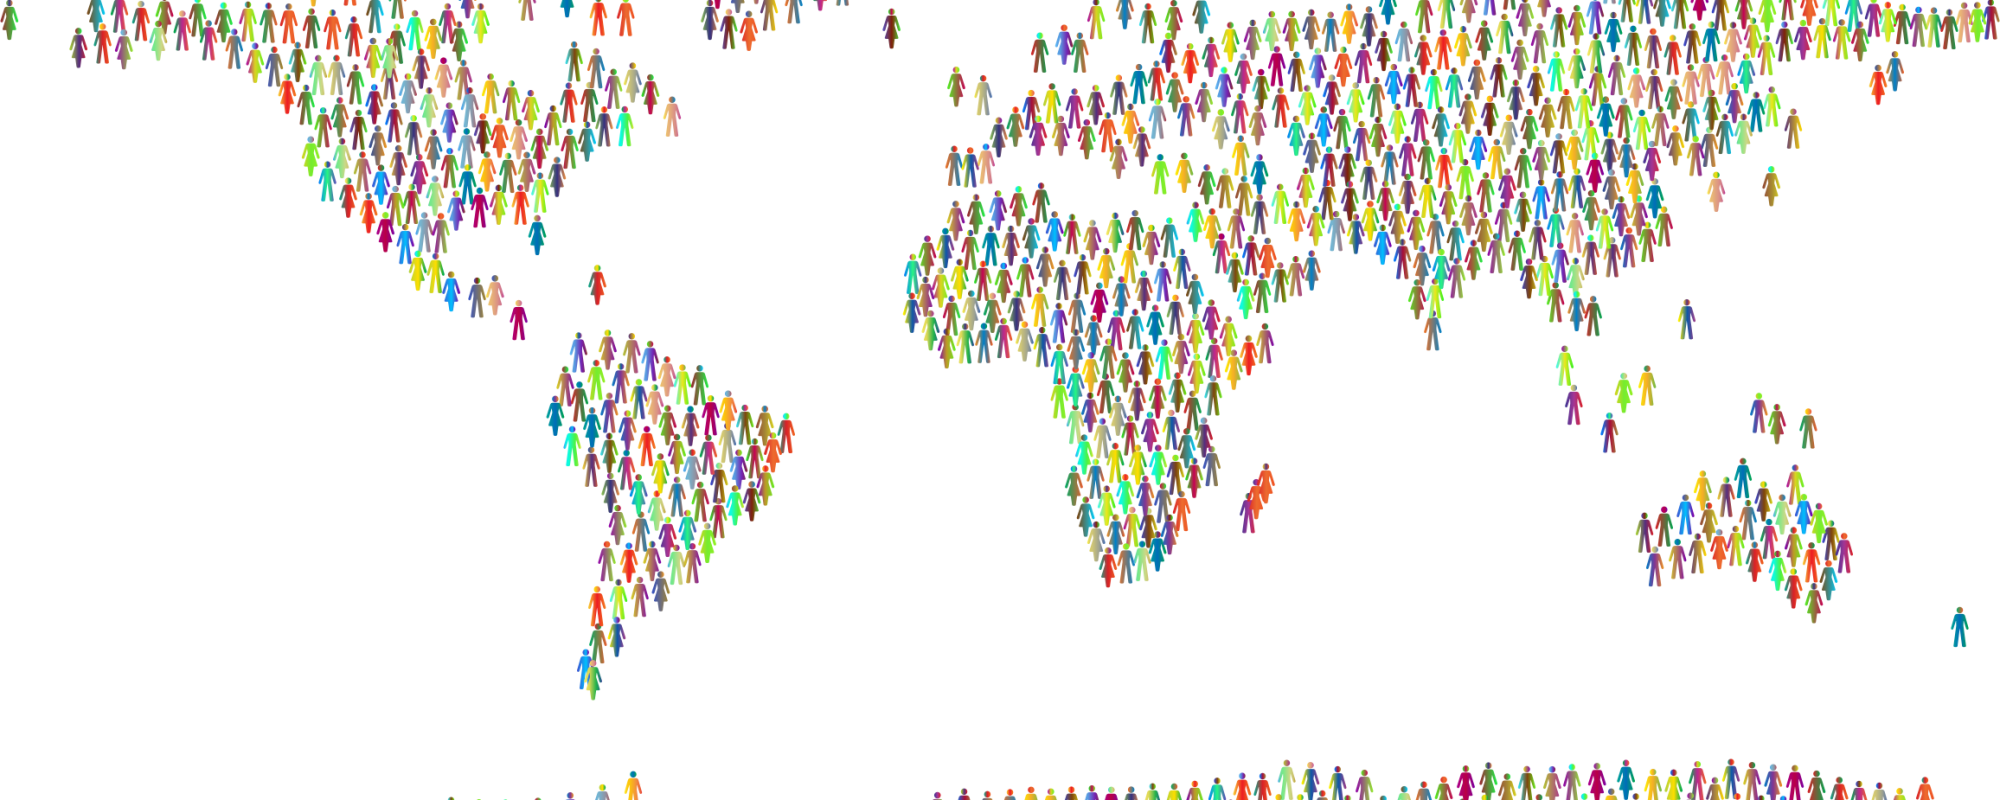 People-World-Map-Prismatic-2